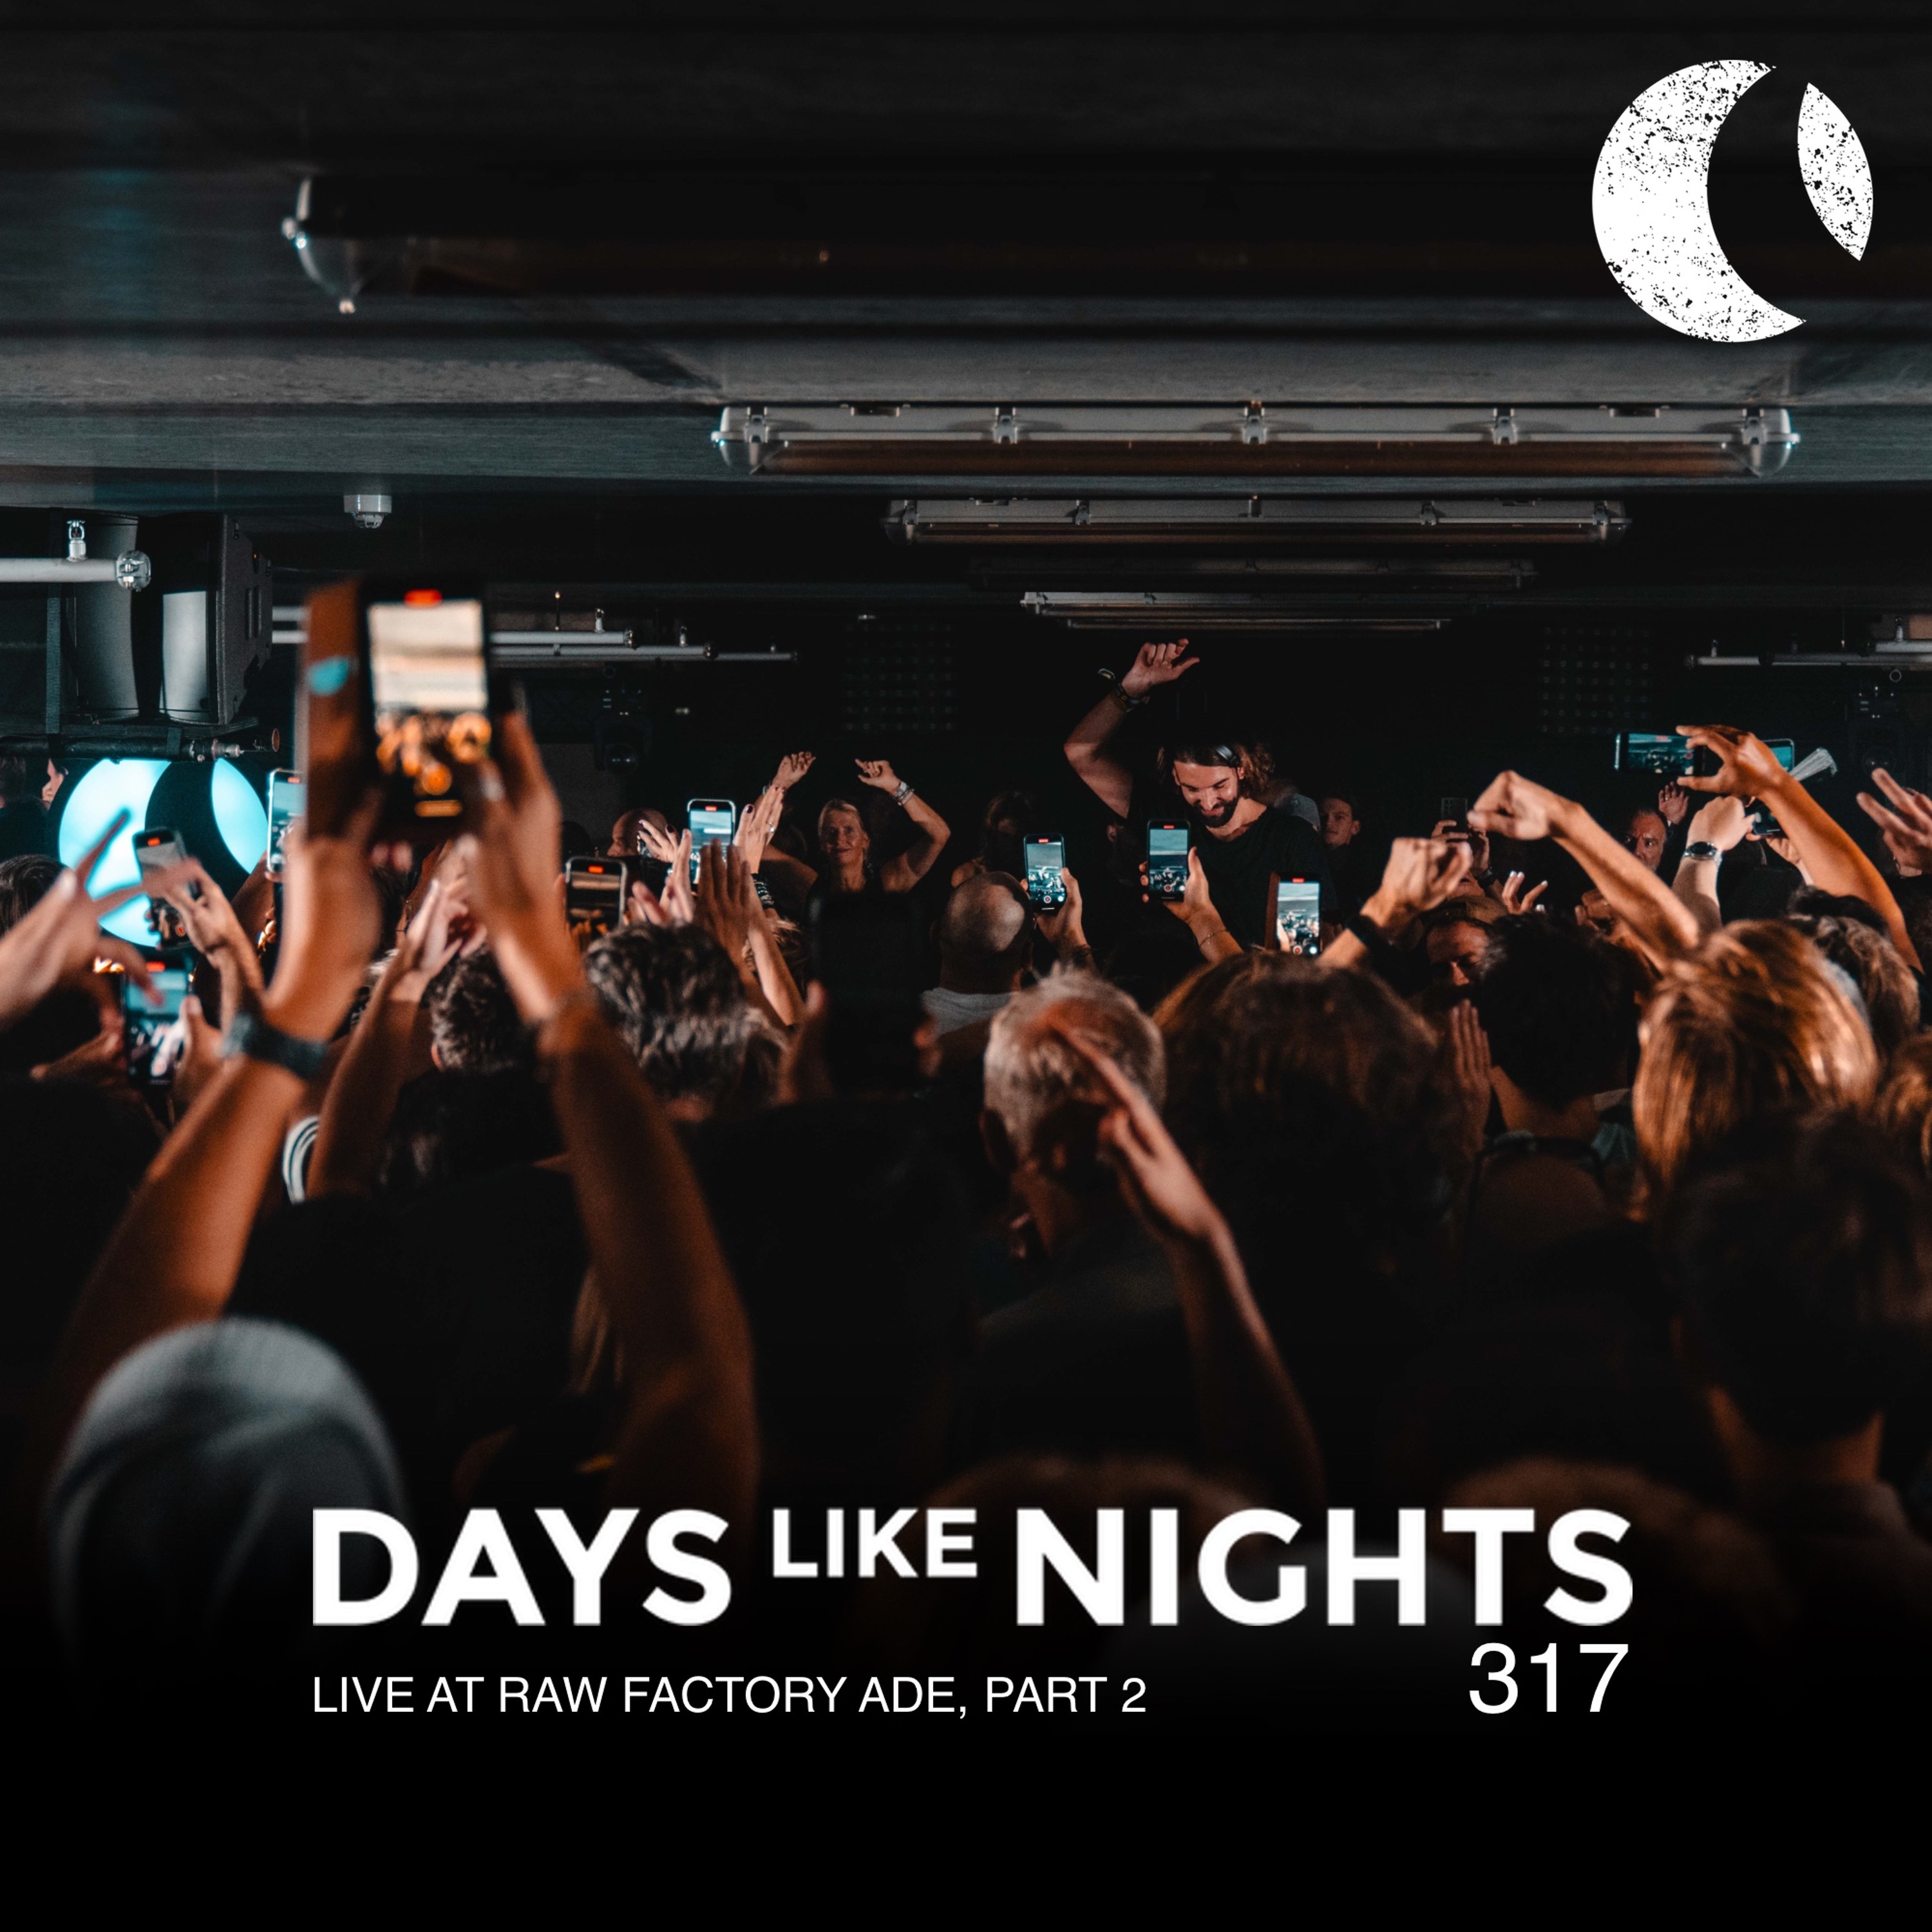 DAYS like NIGHTS 317 - Live at RAW Factory ADE, Part 2